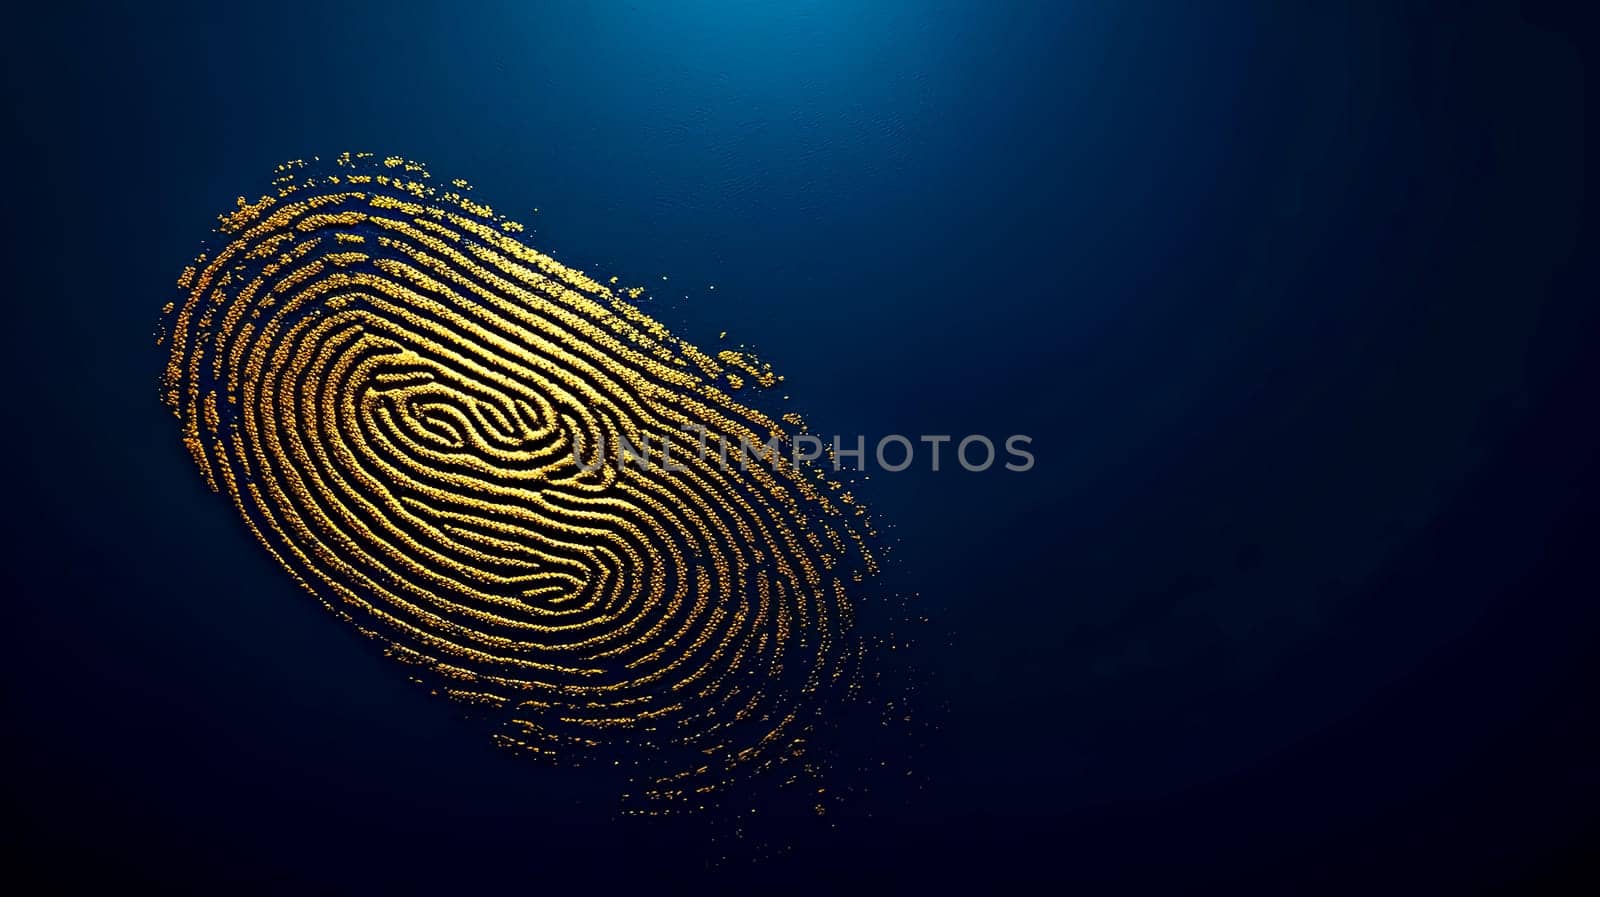 Golden Fingerprint on Navy Background for Secure Biometric Authentication and Identity Verification, copy space